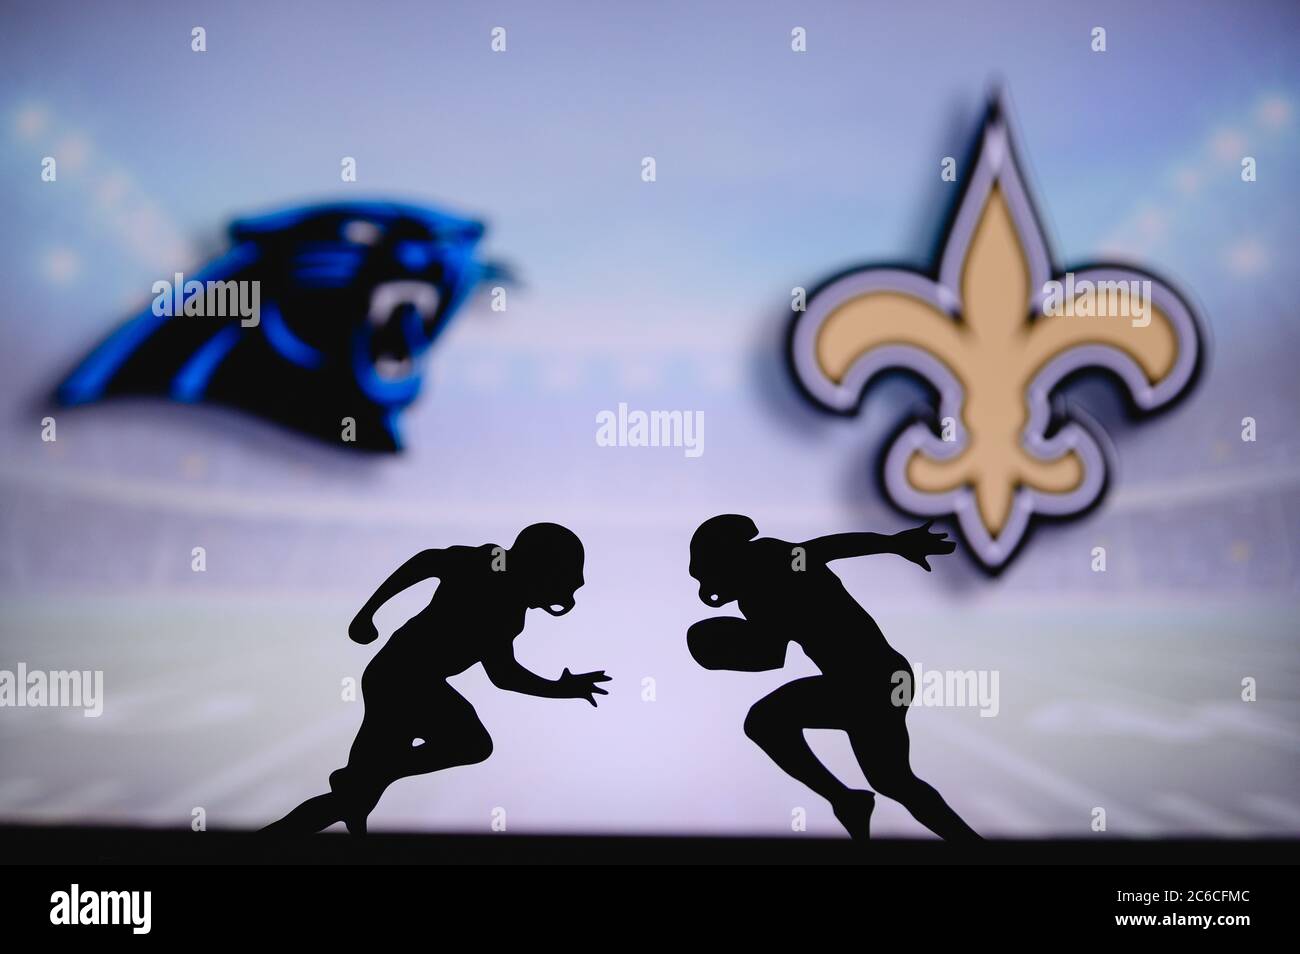 carolina panthers and new orleans saints